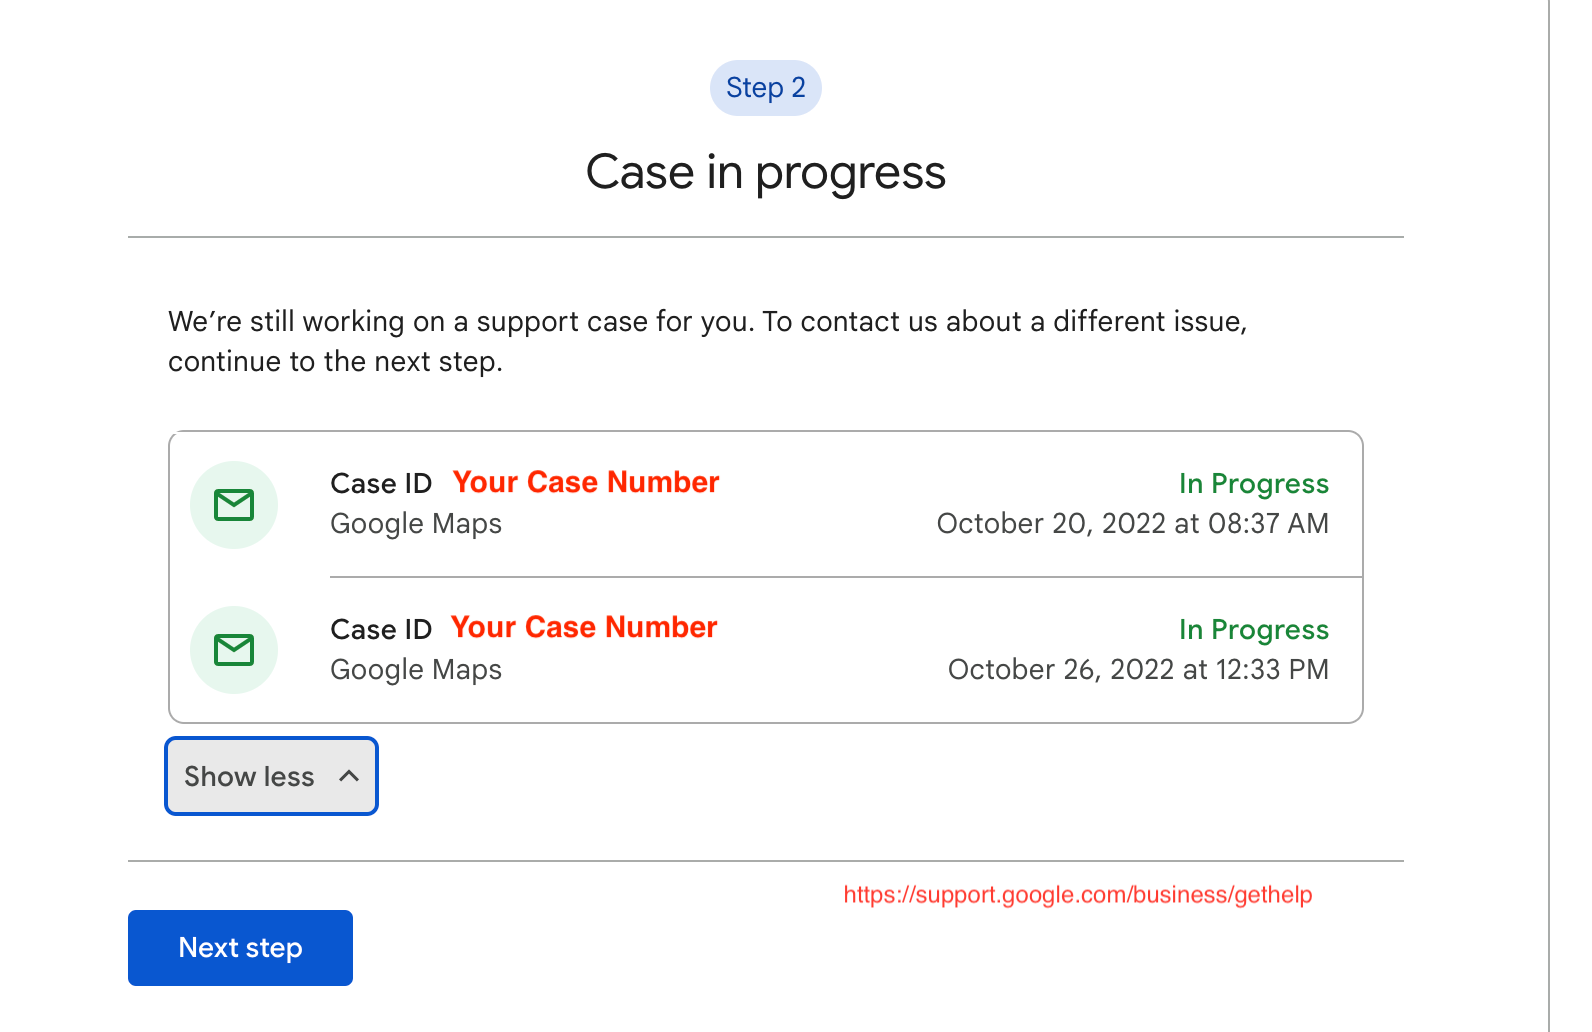 We had two case numbers because we submitted multiple request forms. It's best to only submit one form and wait until your case is "In Progress".